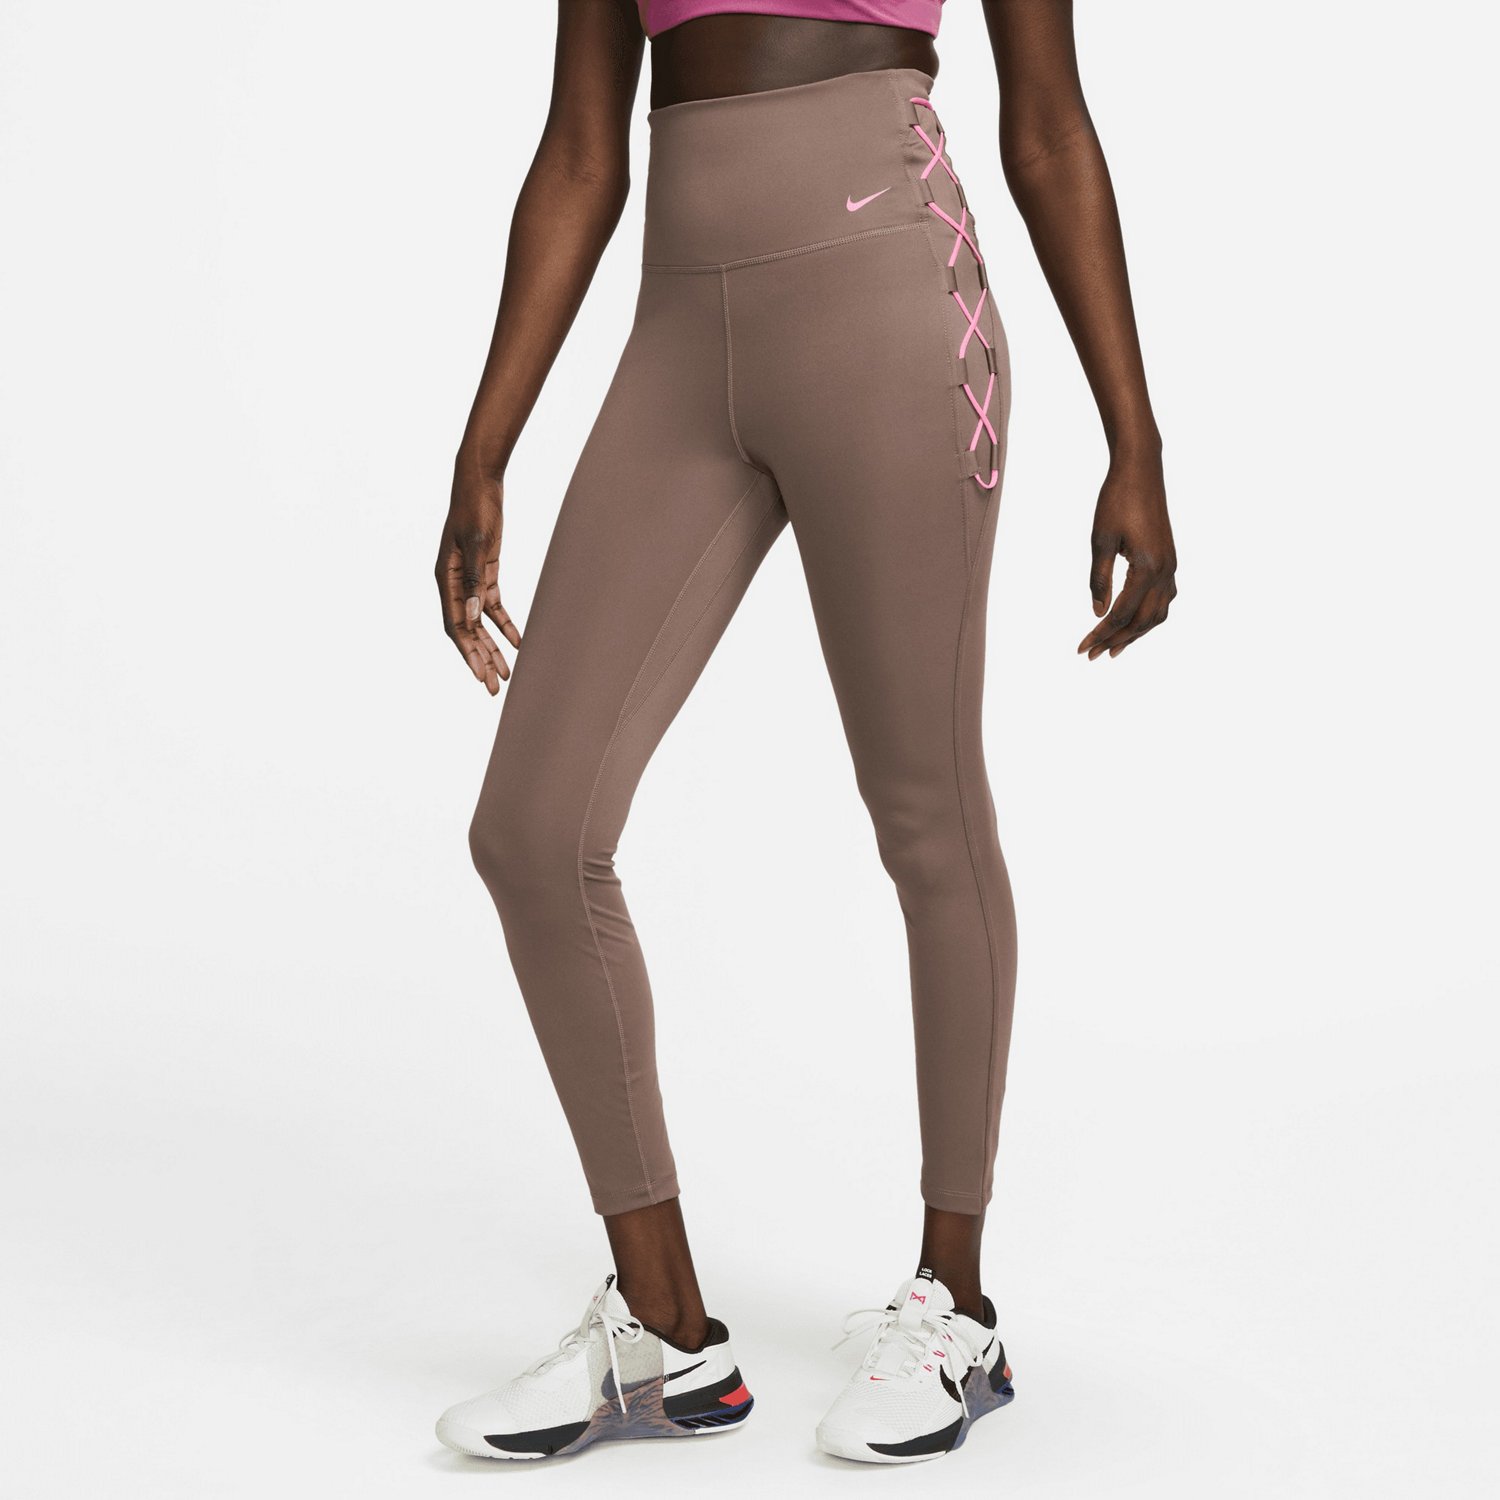 Buy Nike One Leggings from the Laura Ashley online shop